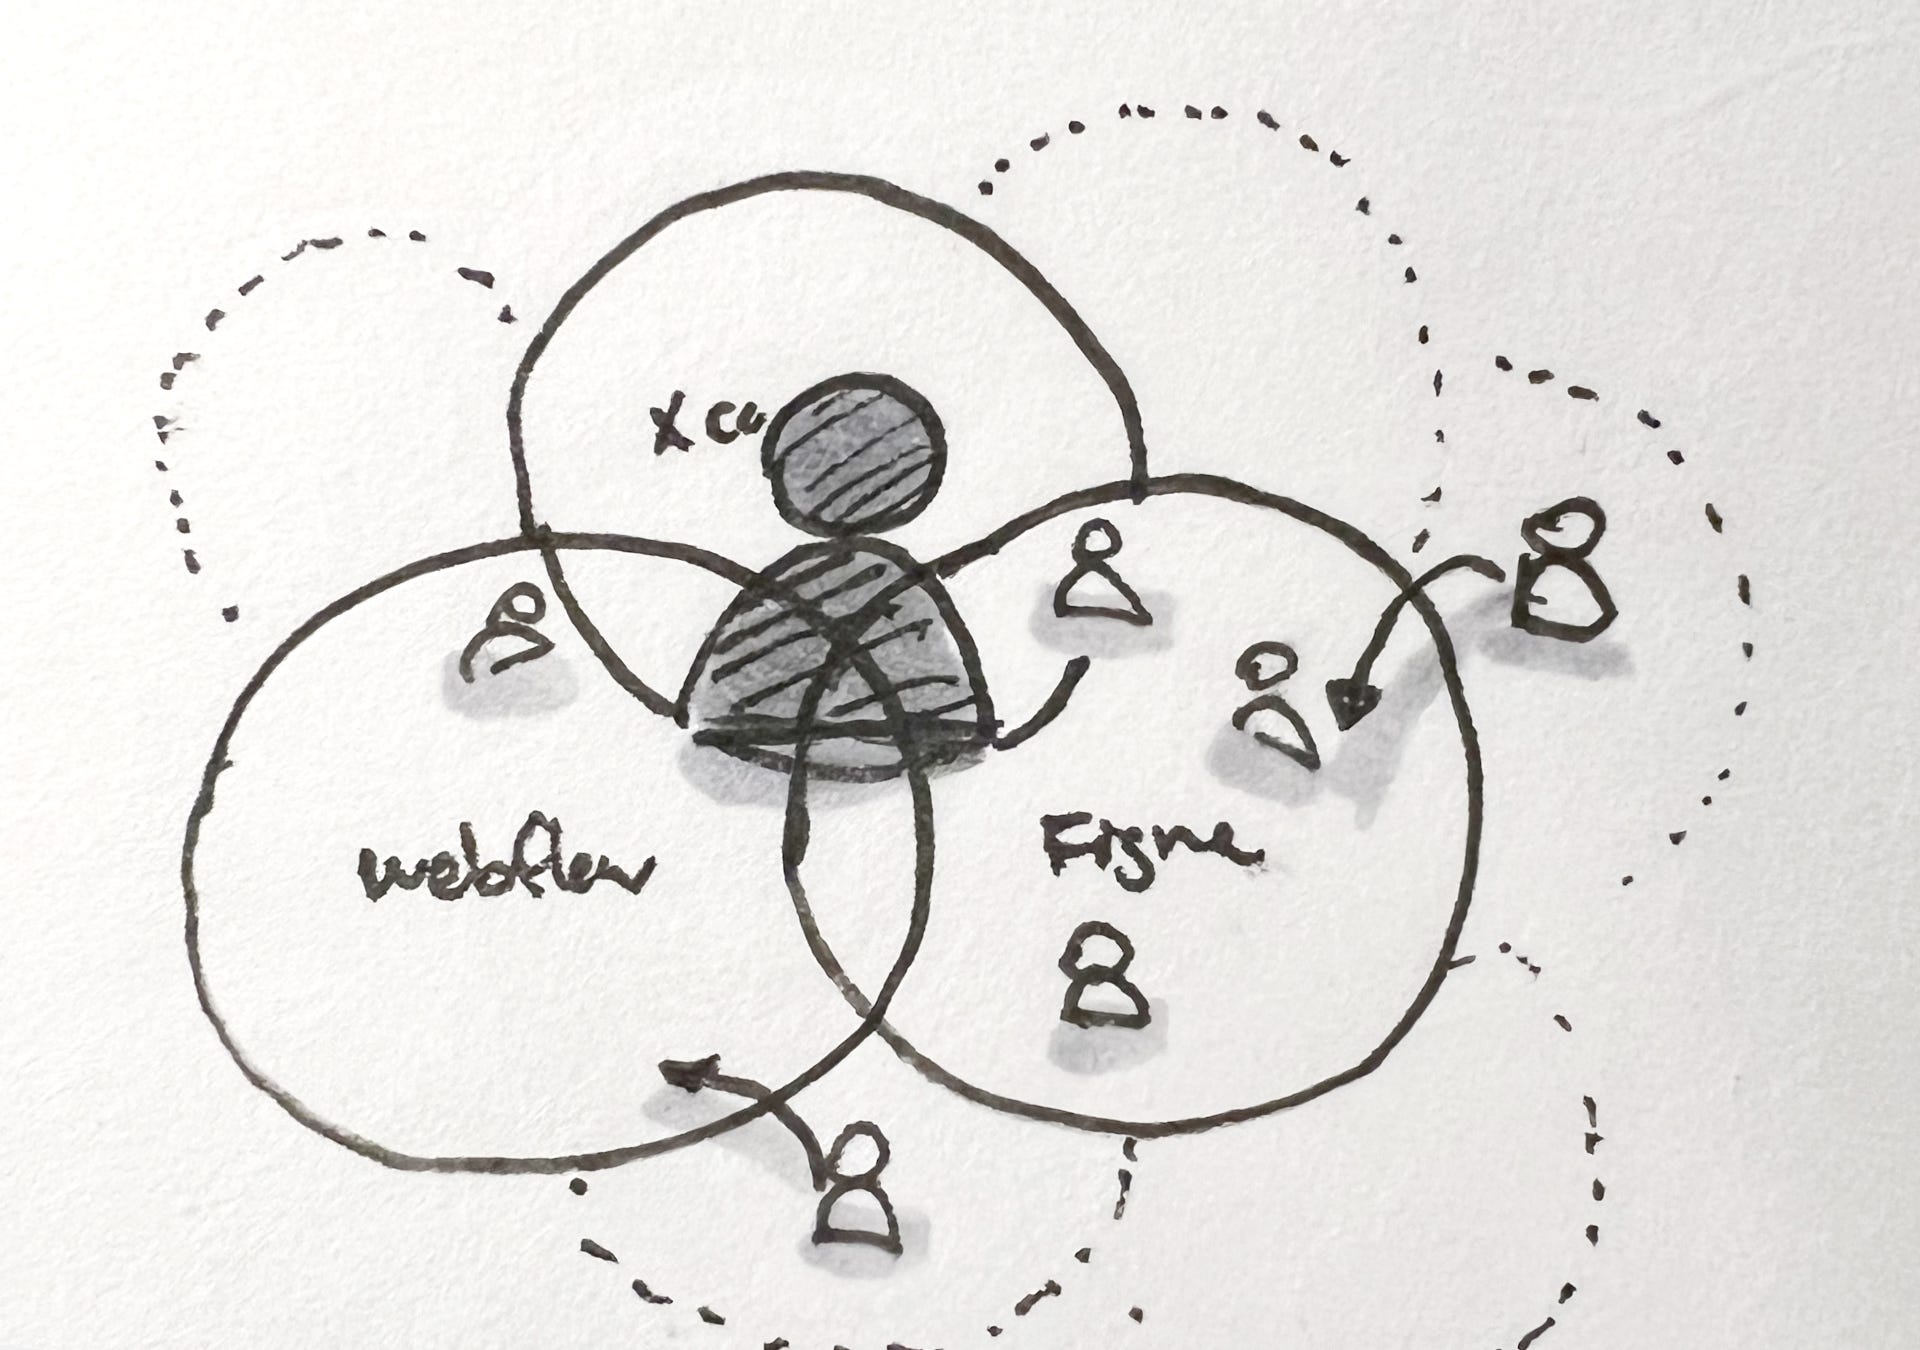 Drawing of multiple circles with overlap of where communities intersect